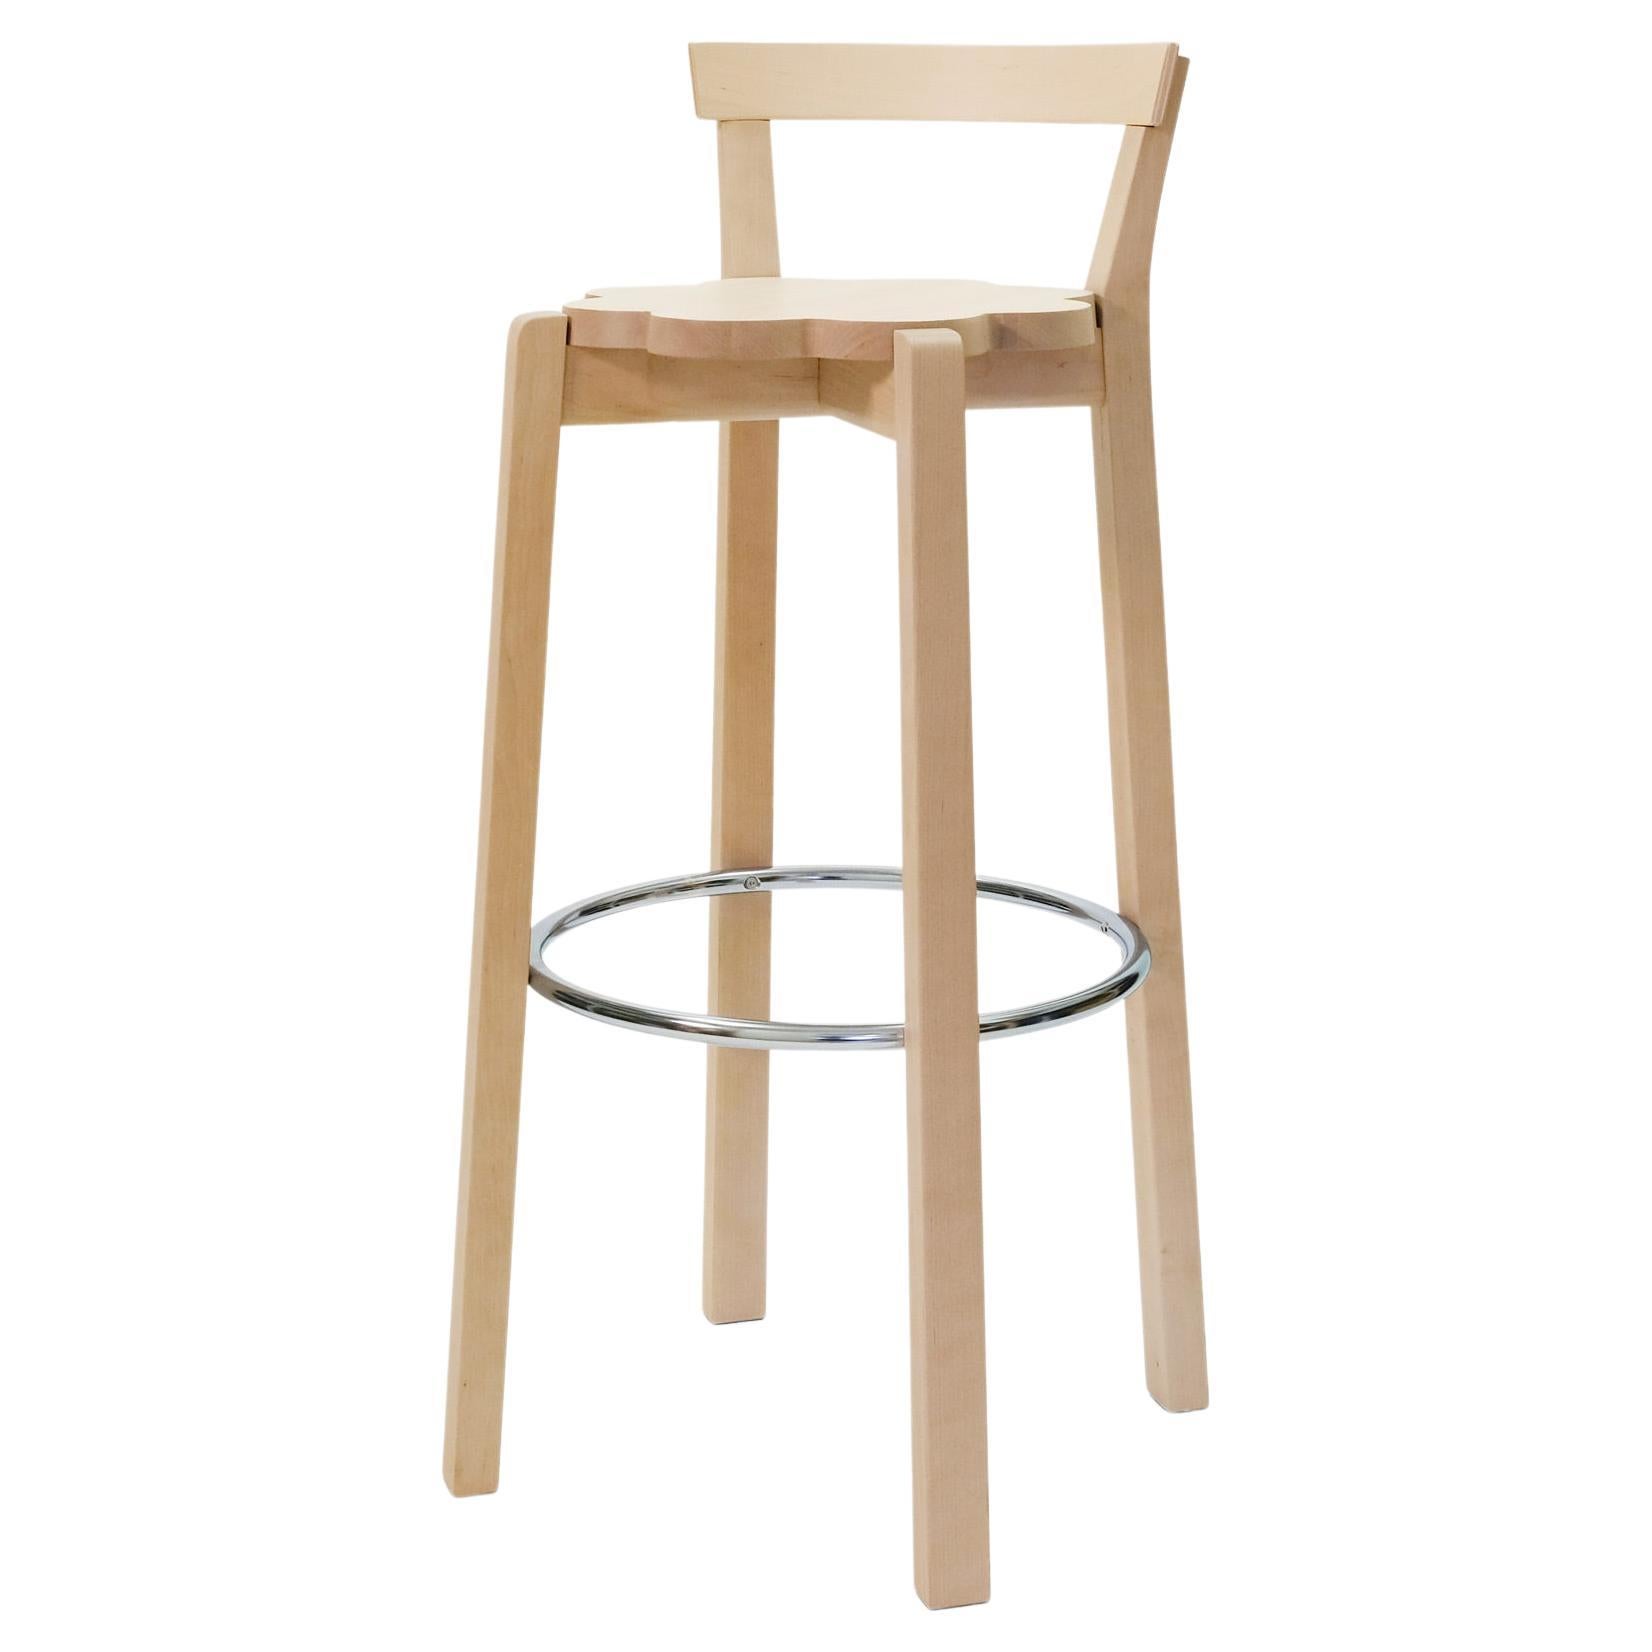 Large Natural Blossom Bar Chair by Storängen Design